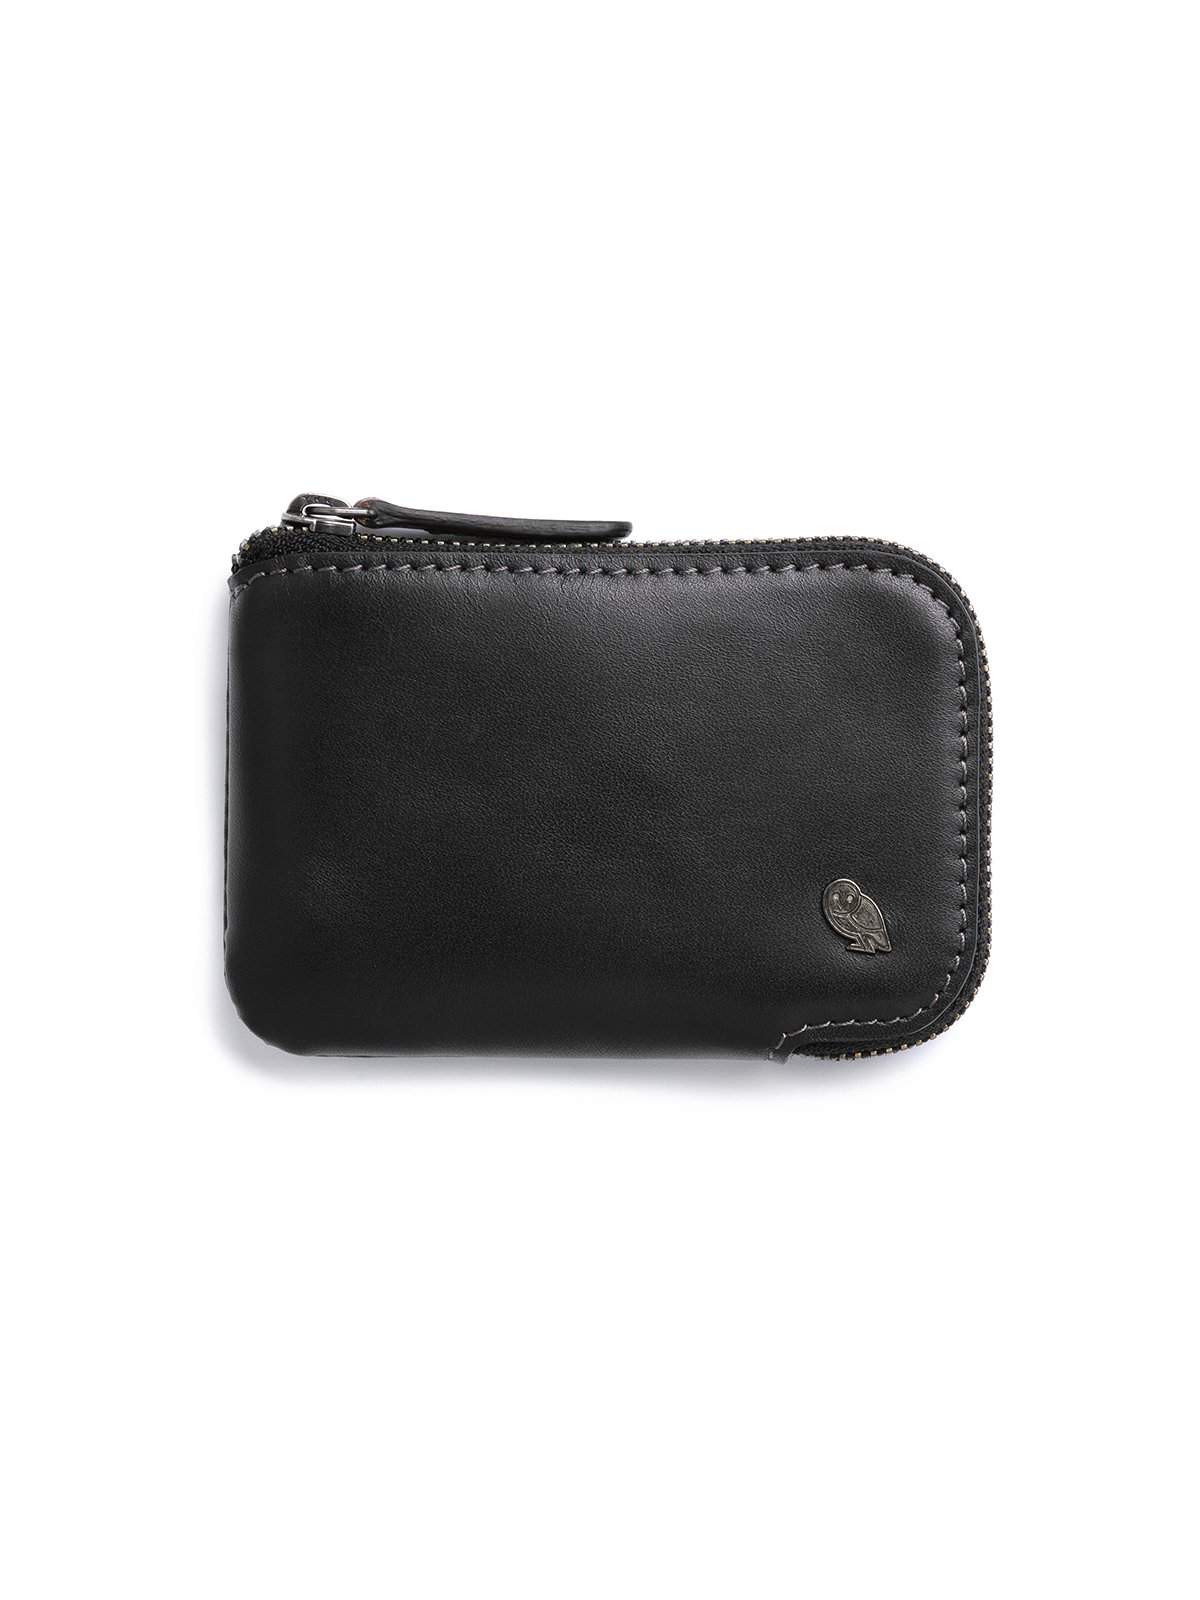 Bellroy Card Pocket Black - MORE by Morello Indonesia